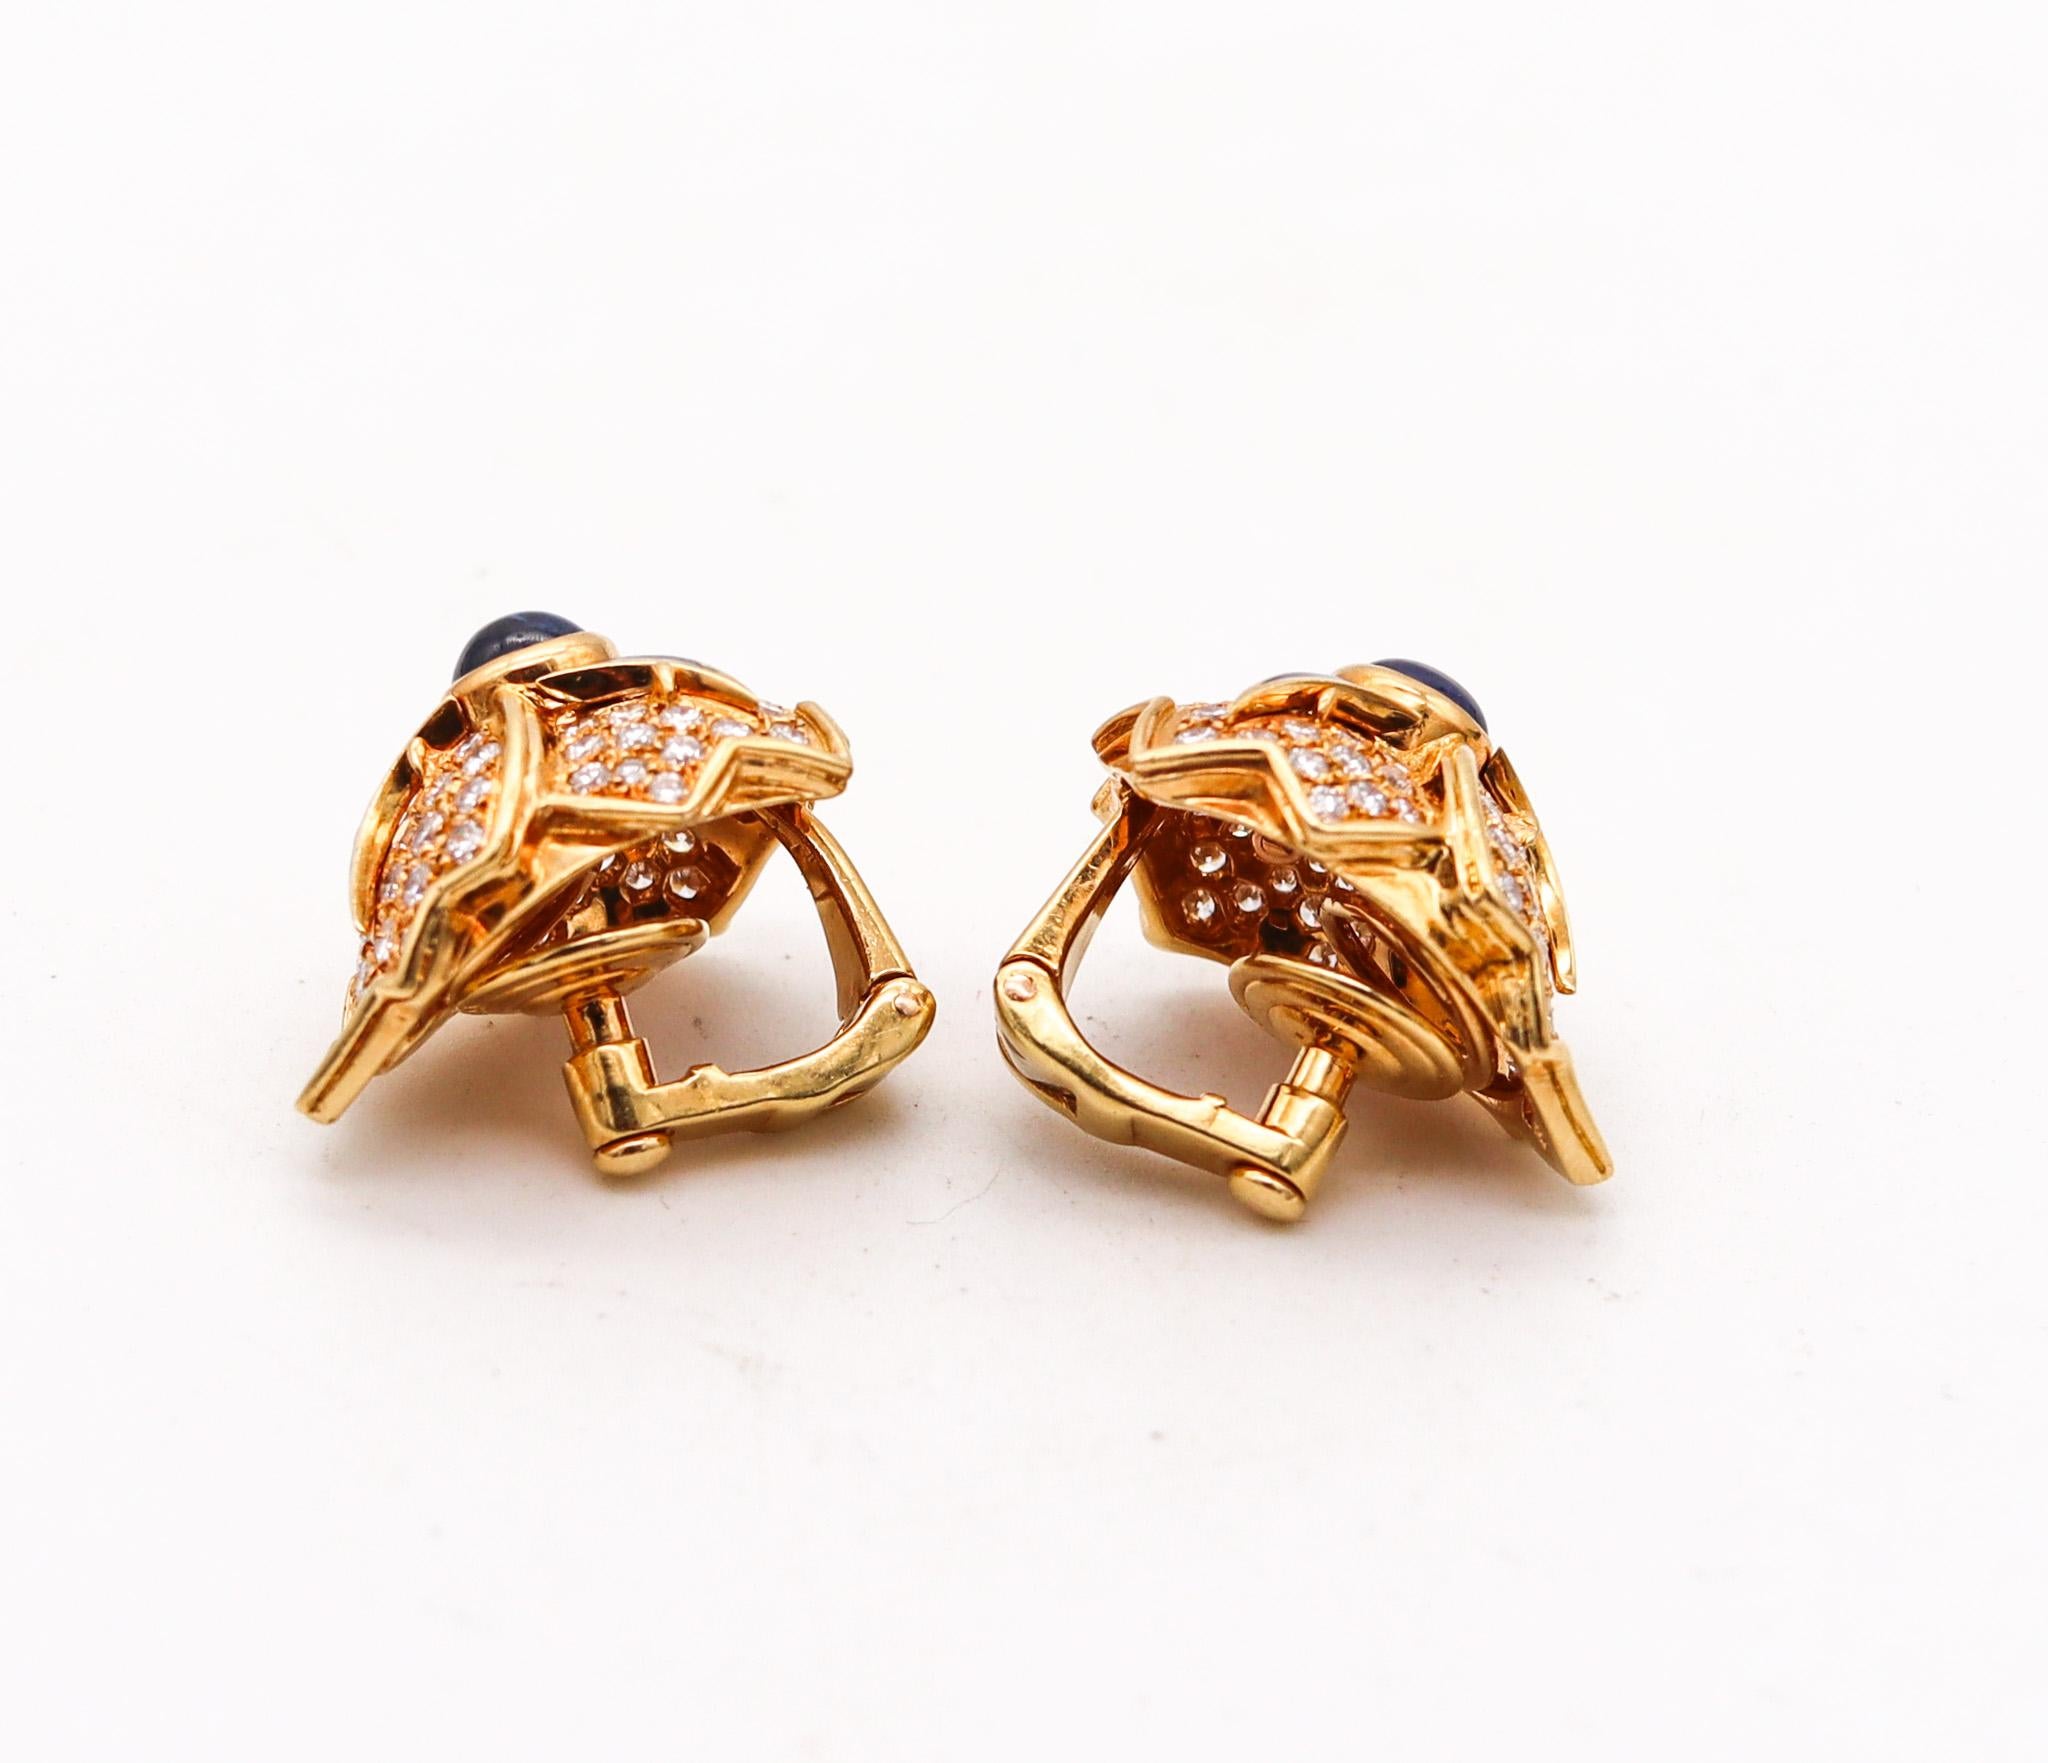 Modern Chaumet Paris Clip On Earrings In 18Kt Gold With 5.64 Ctw Sapphires & Diamonds For Sale